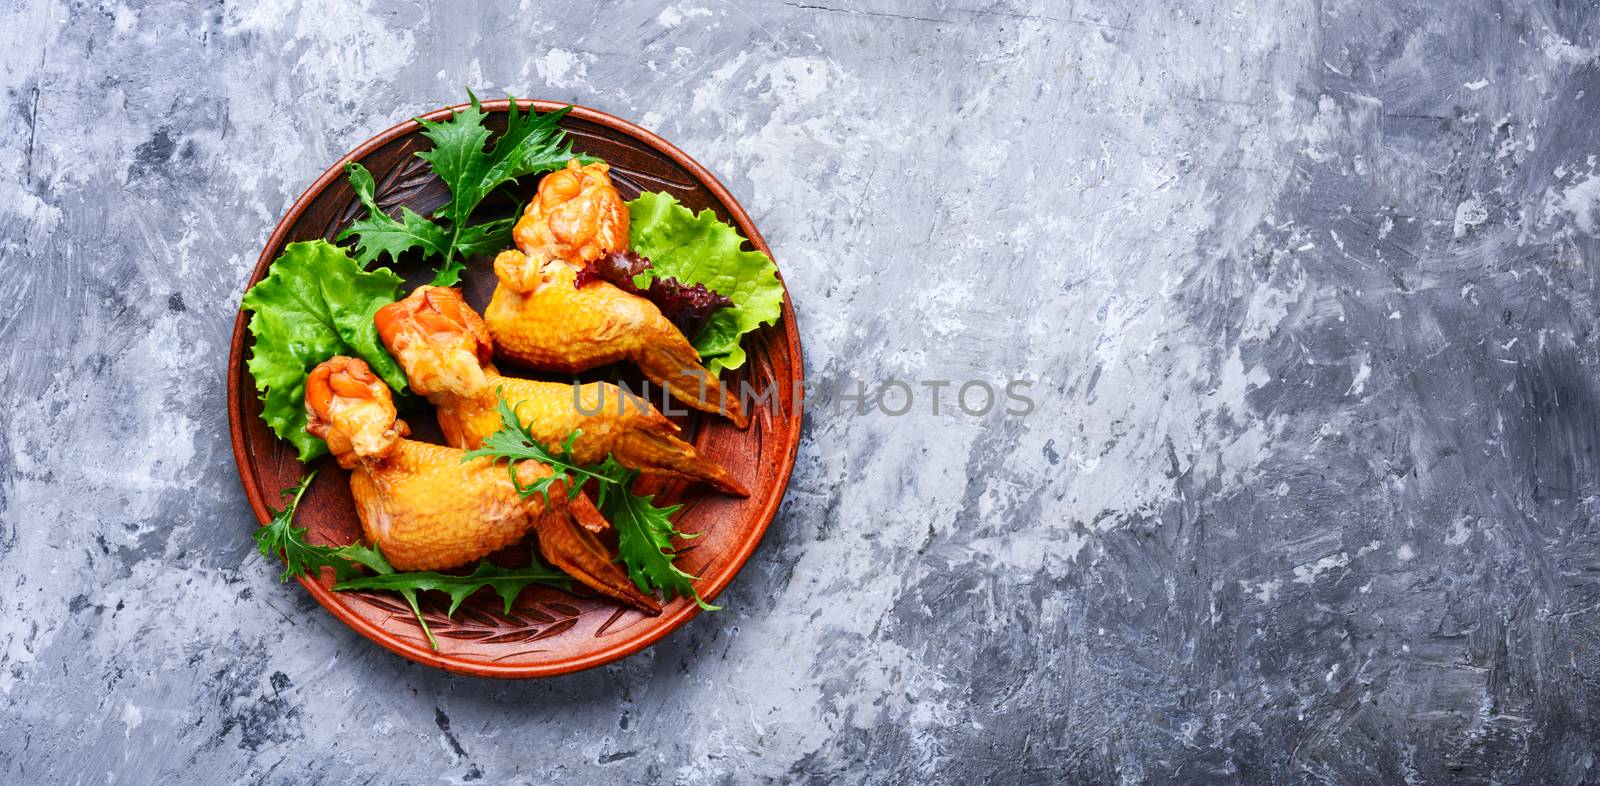 Smoked chicken wings and leaf salad. Fast food.American Cuisine